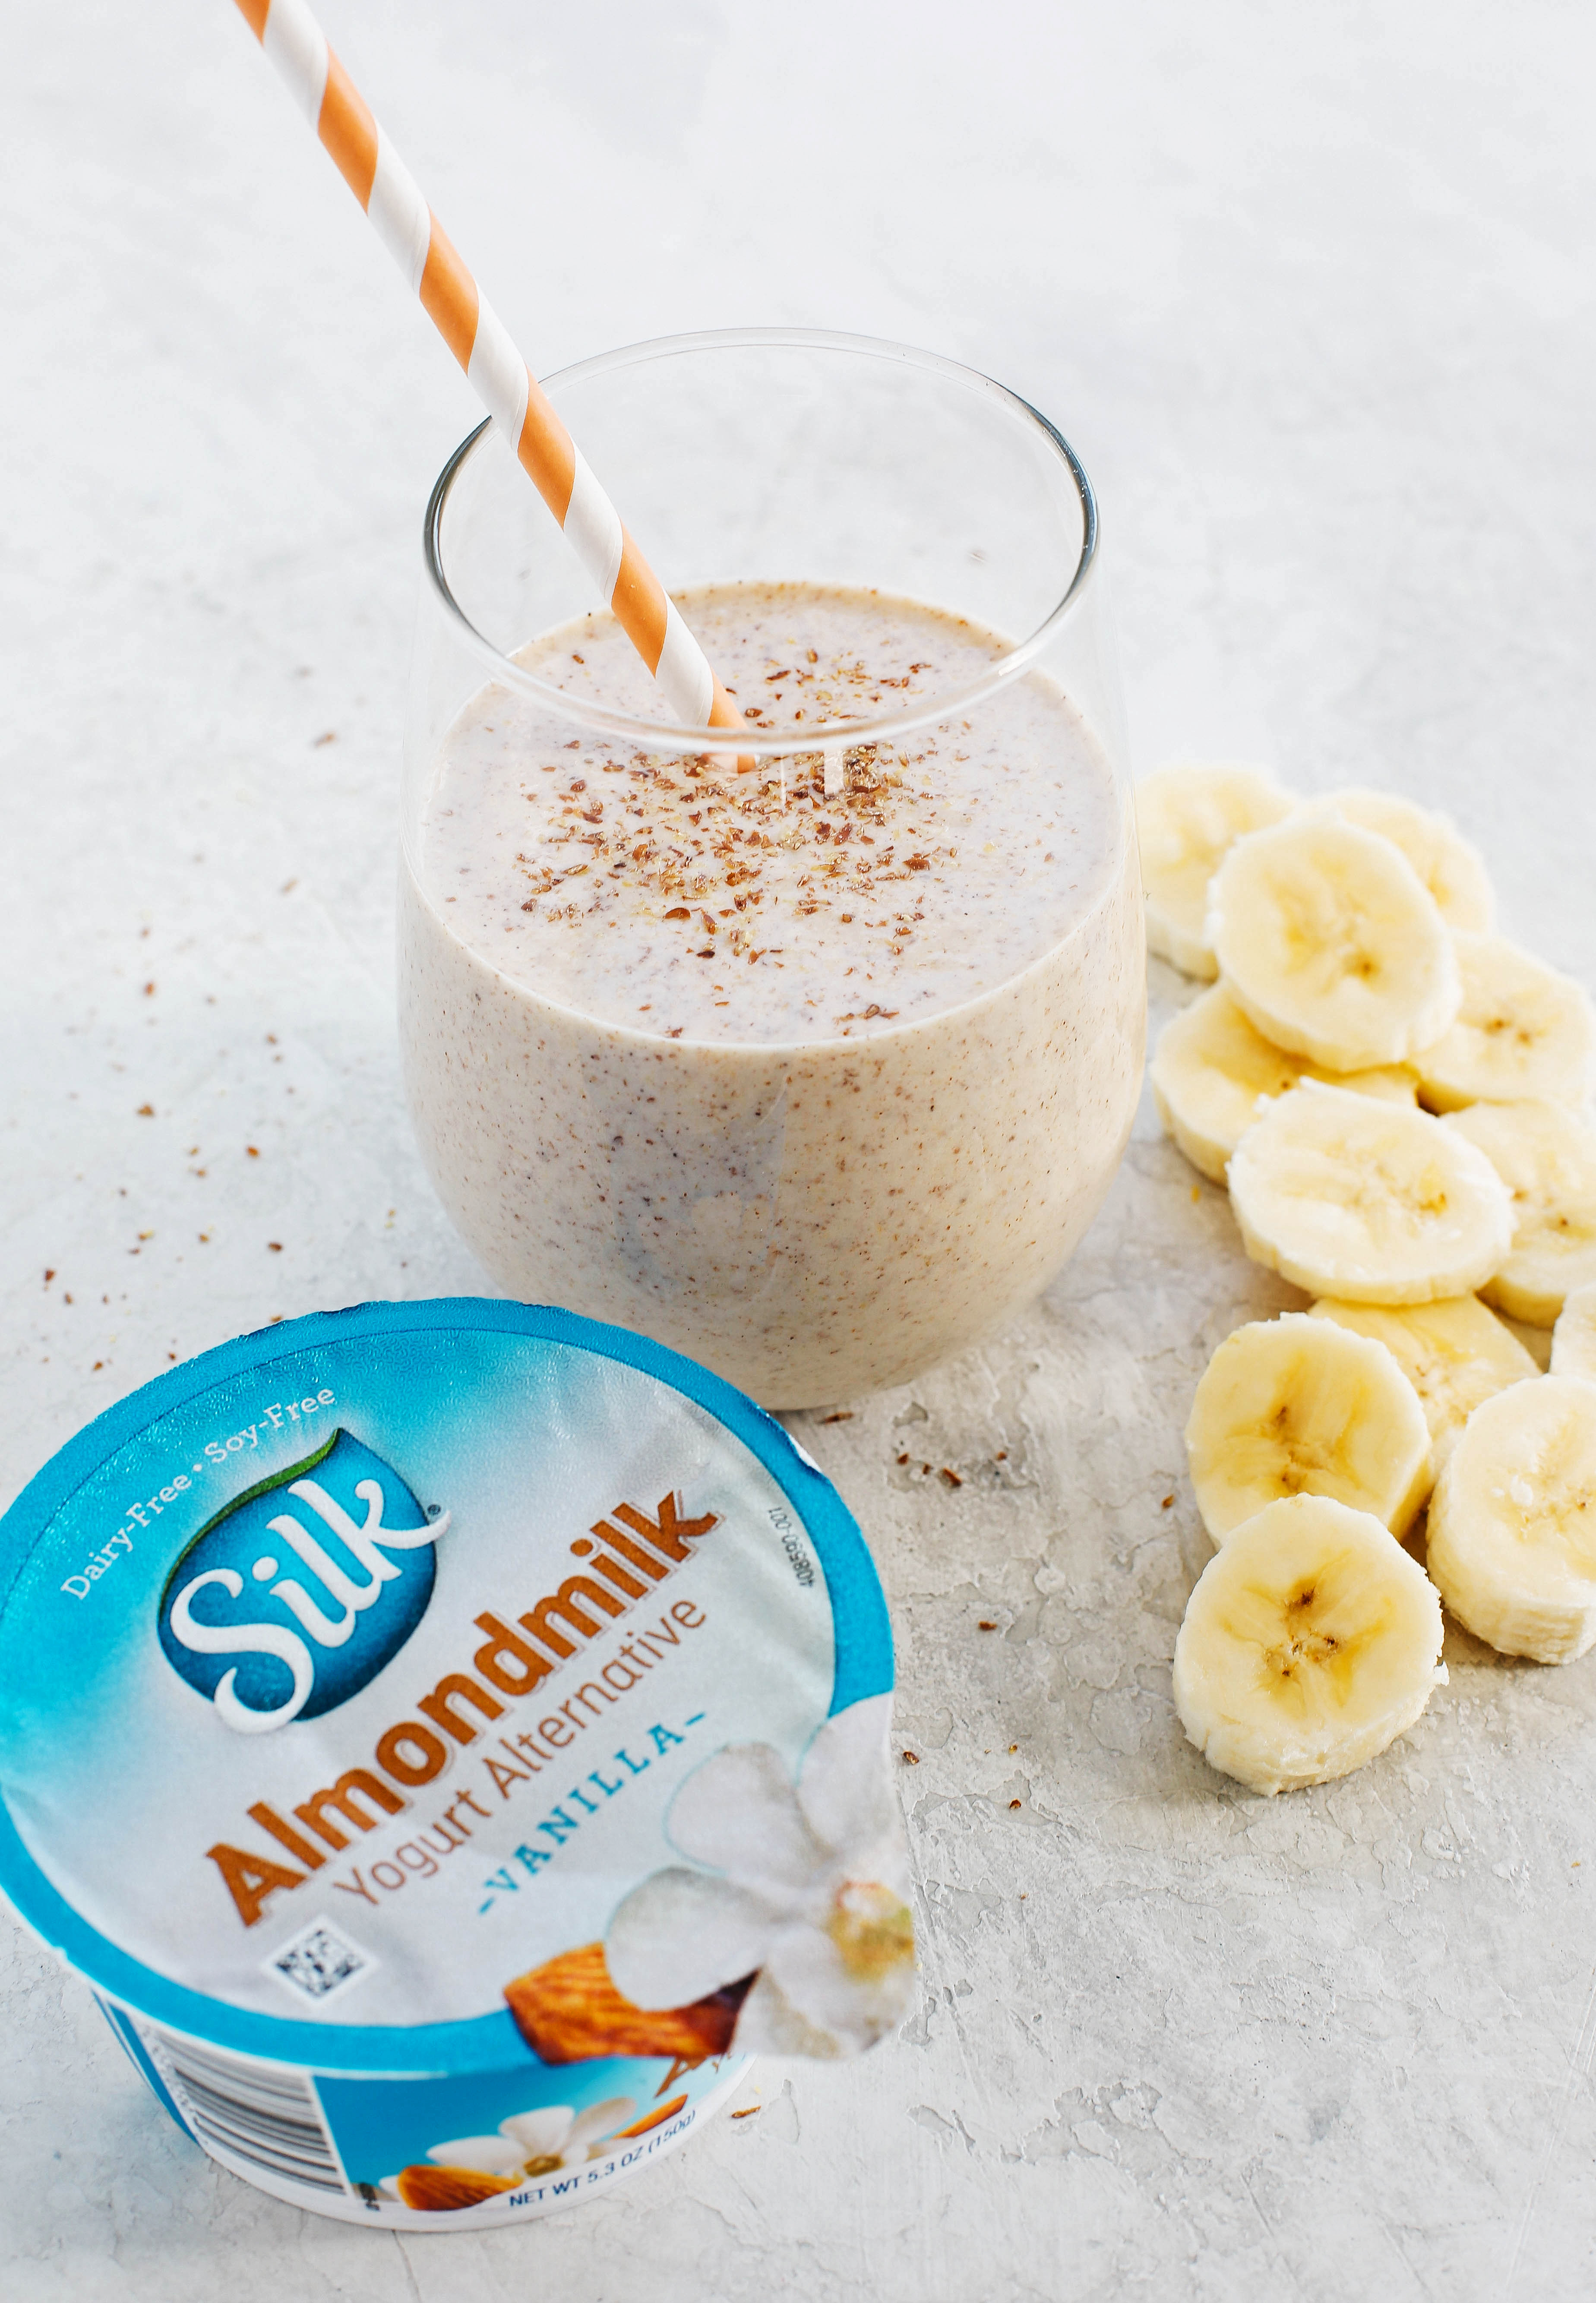 Start your morning off with this thick and creamy Banana Oat Breakfast Smoothie that is healthy, delicious and super quick to make! #dairyfree #vegan